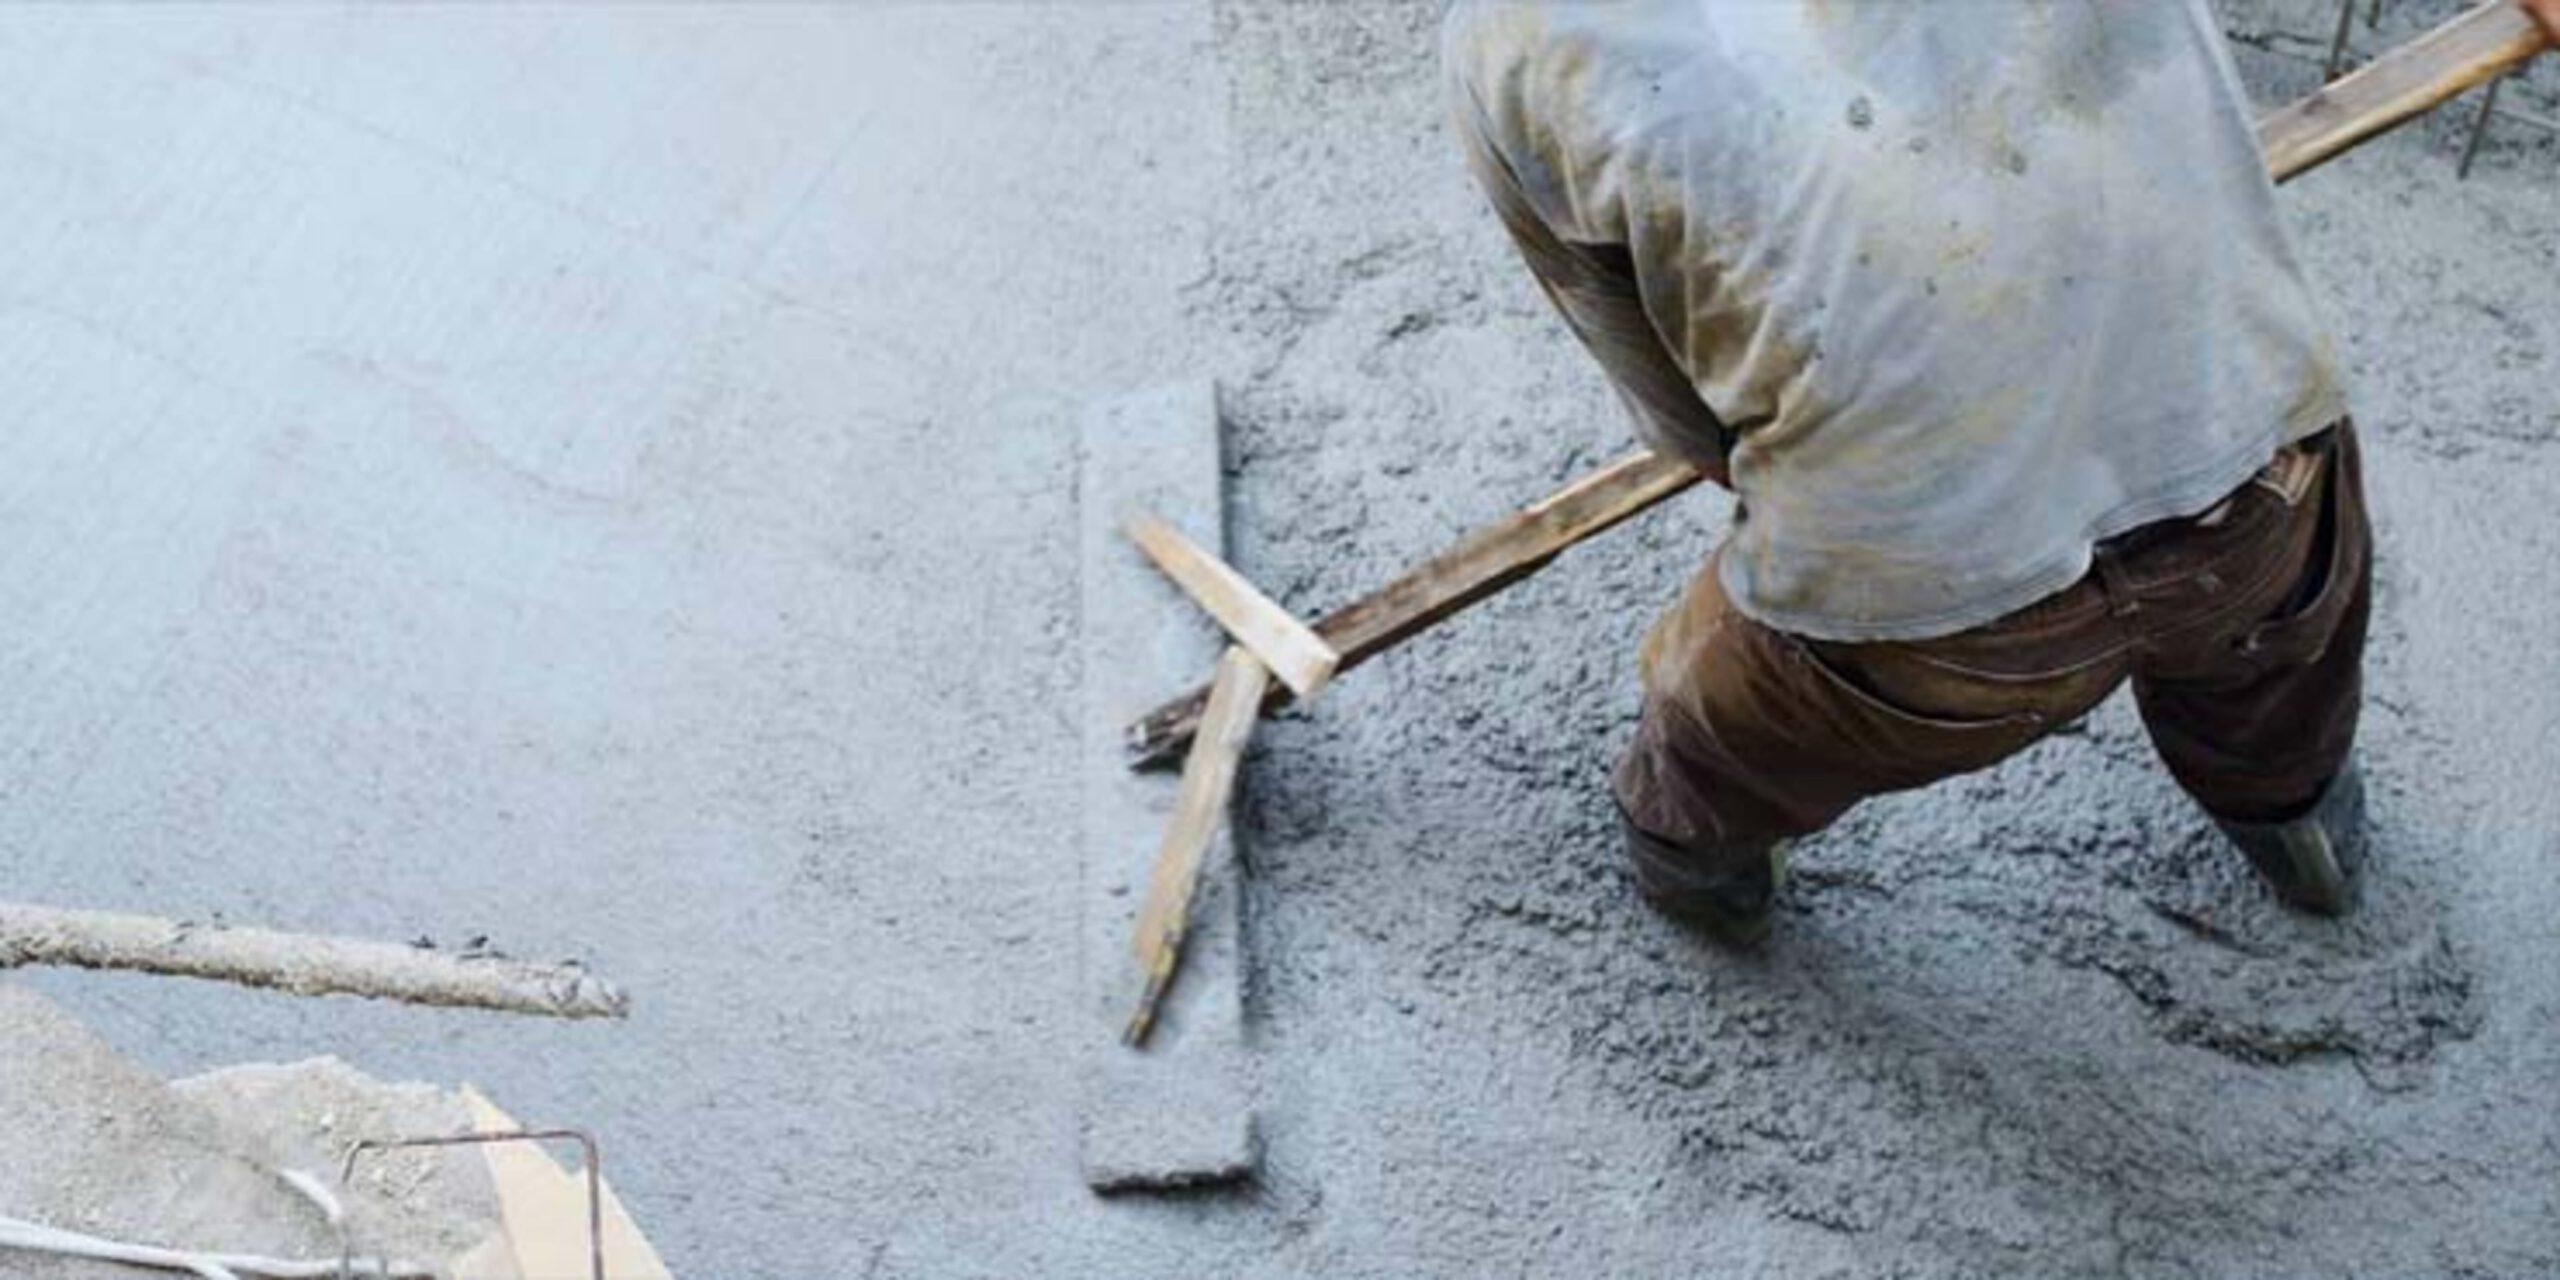 What You Need to Know About Concrete Contractors